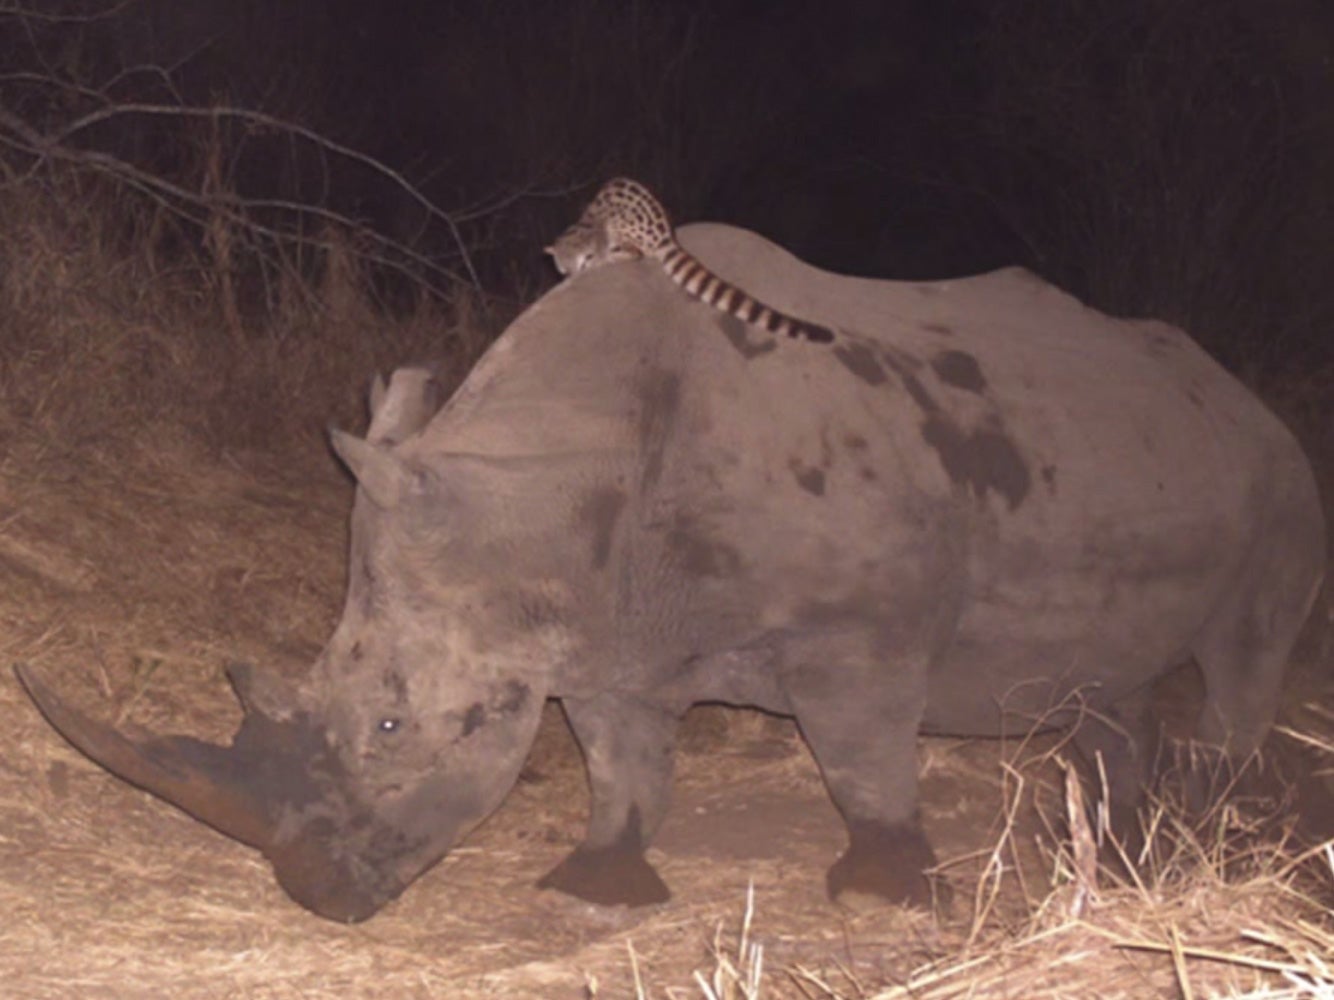 Genet rides on the back of a rhino in South Africa